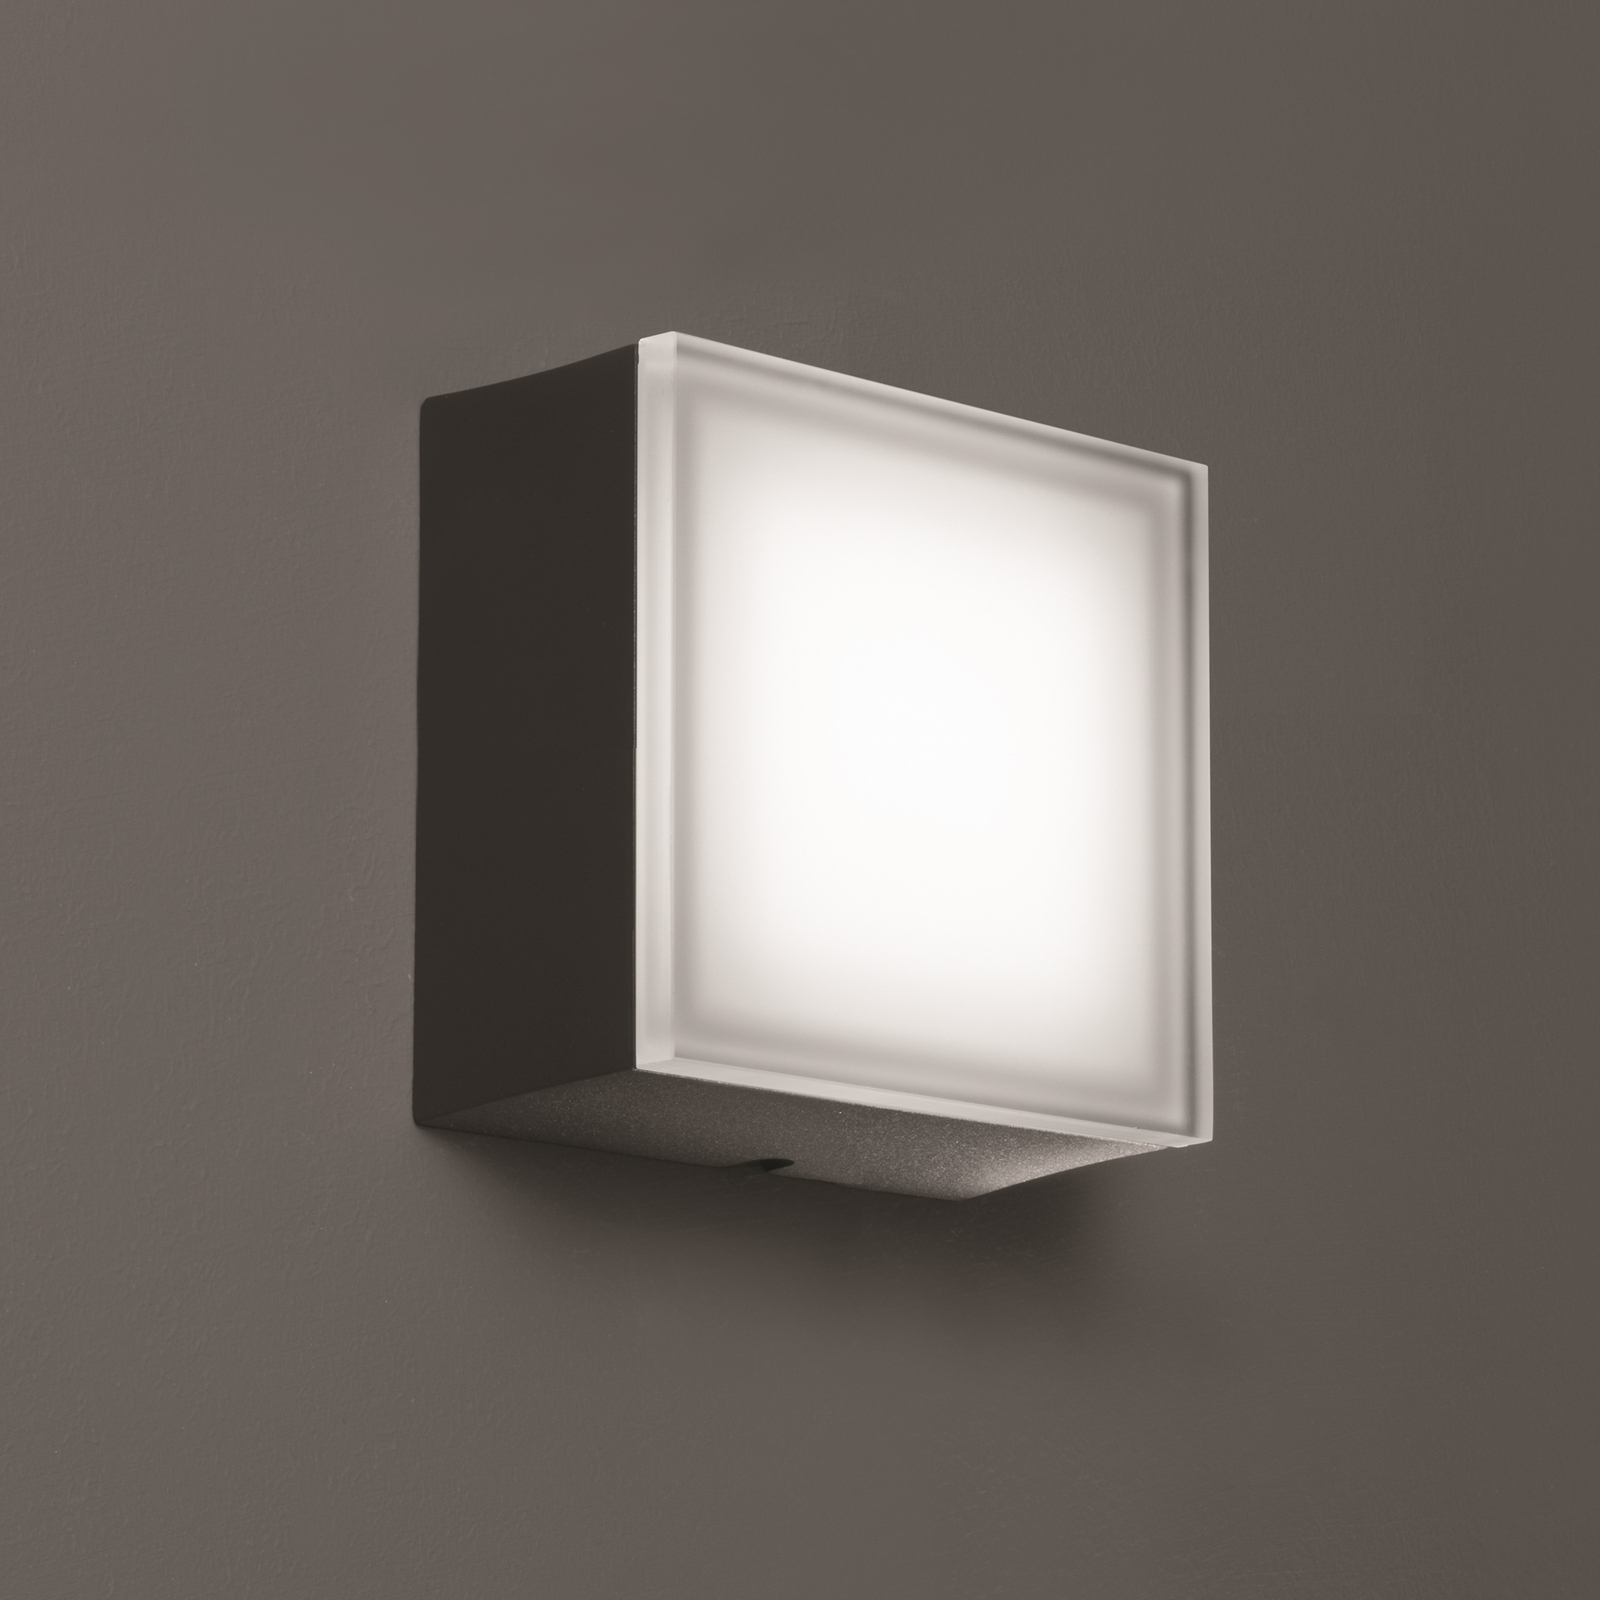 LED outdoor wall lamp 1425 graphite 12.5 x 12.5cm